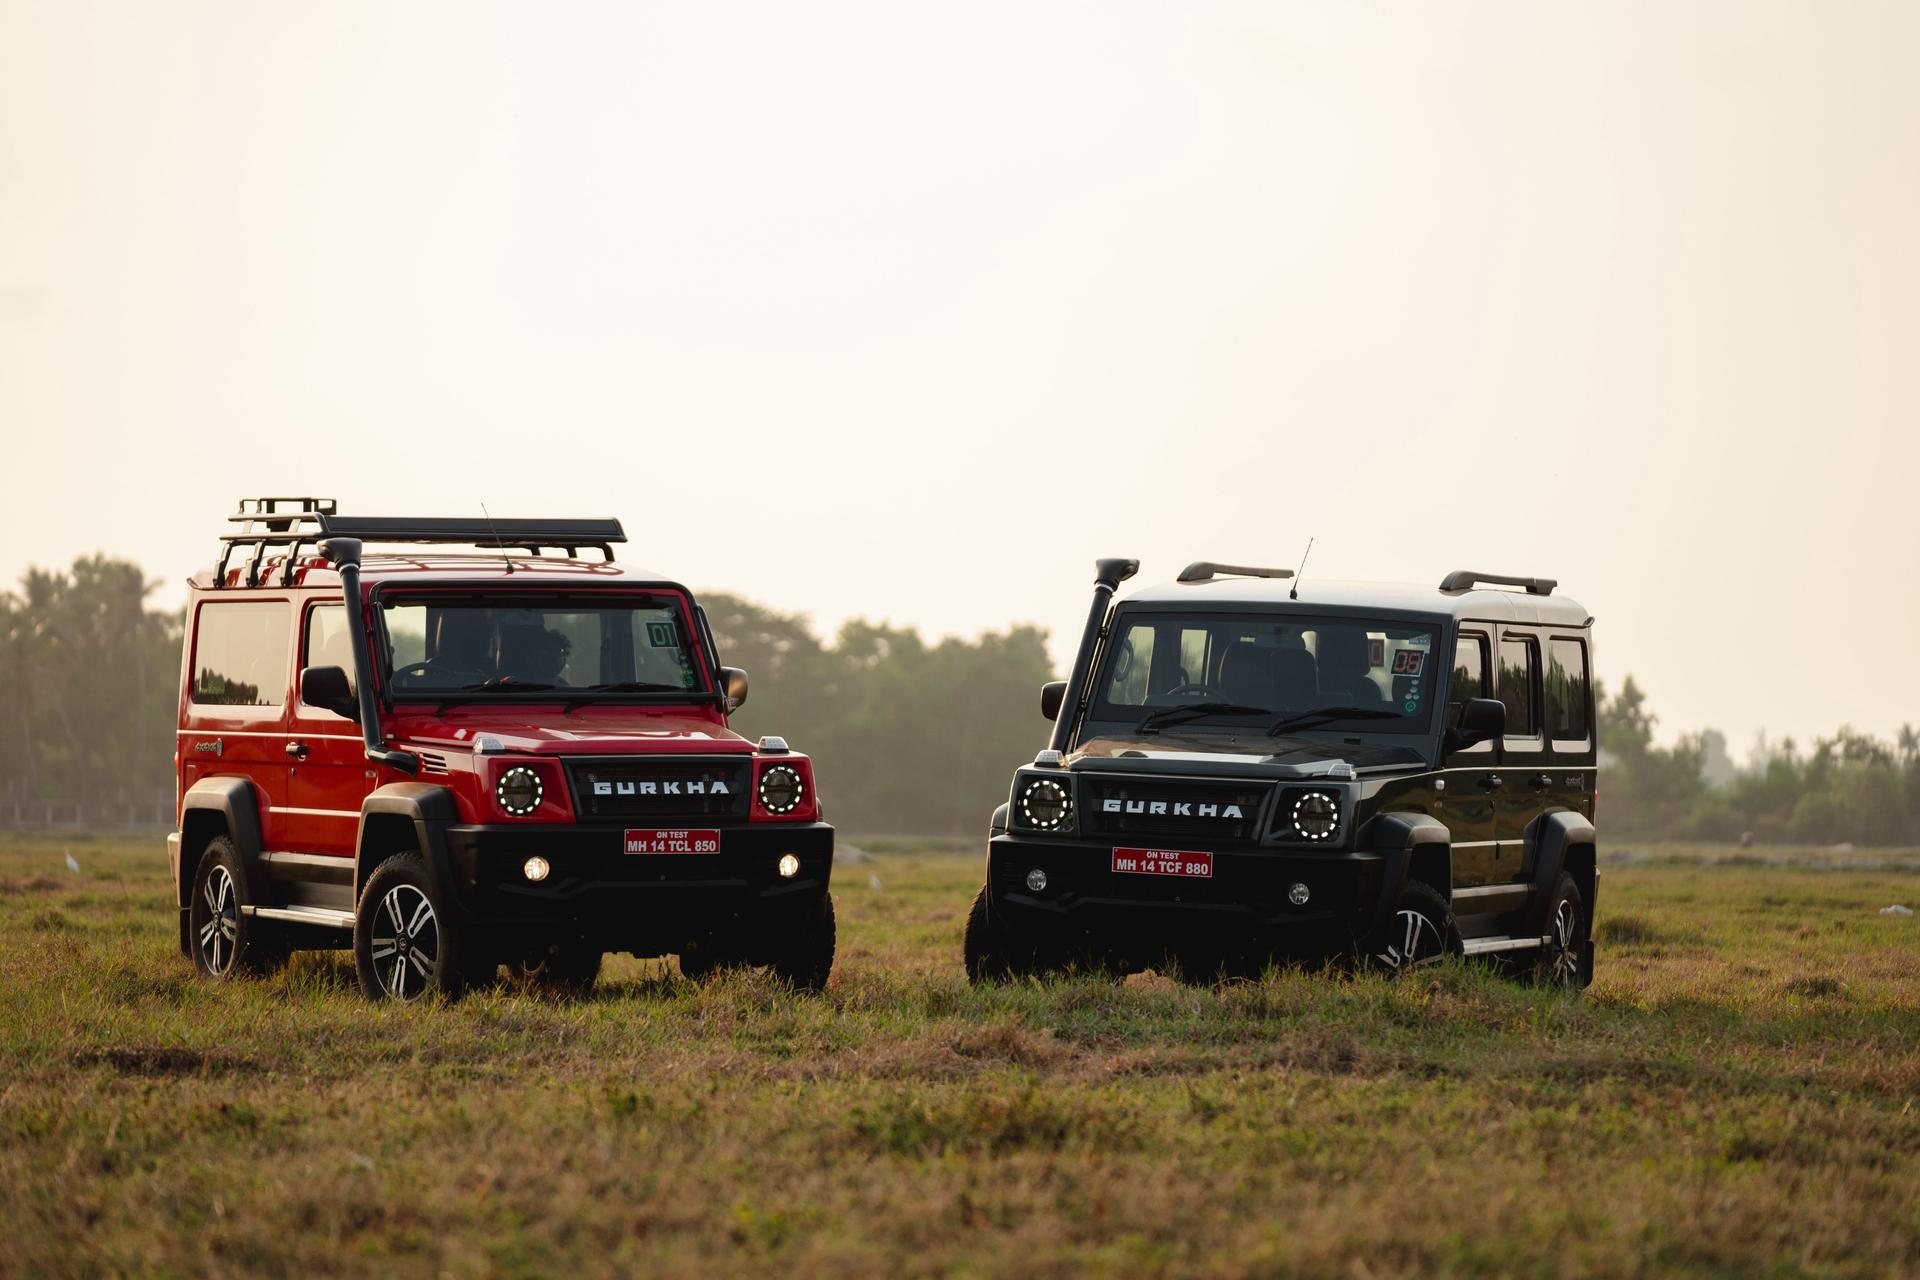 With the 3-door version, Force India has also brought back the 5-door Gurkha. The models are priced at Rs. 16.75 lakh and Rs. 18 lakh (ex-showroom) respectively. 